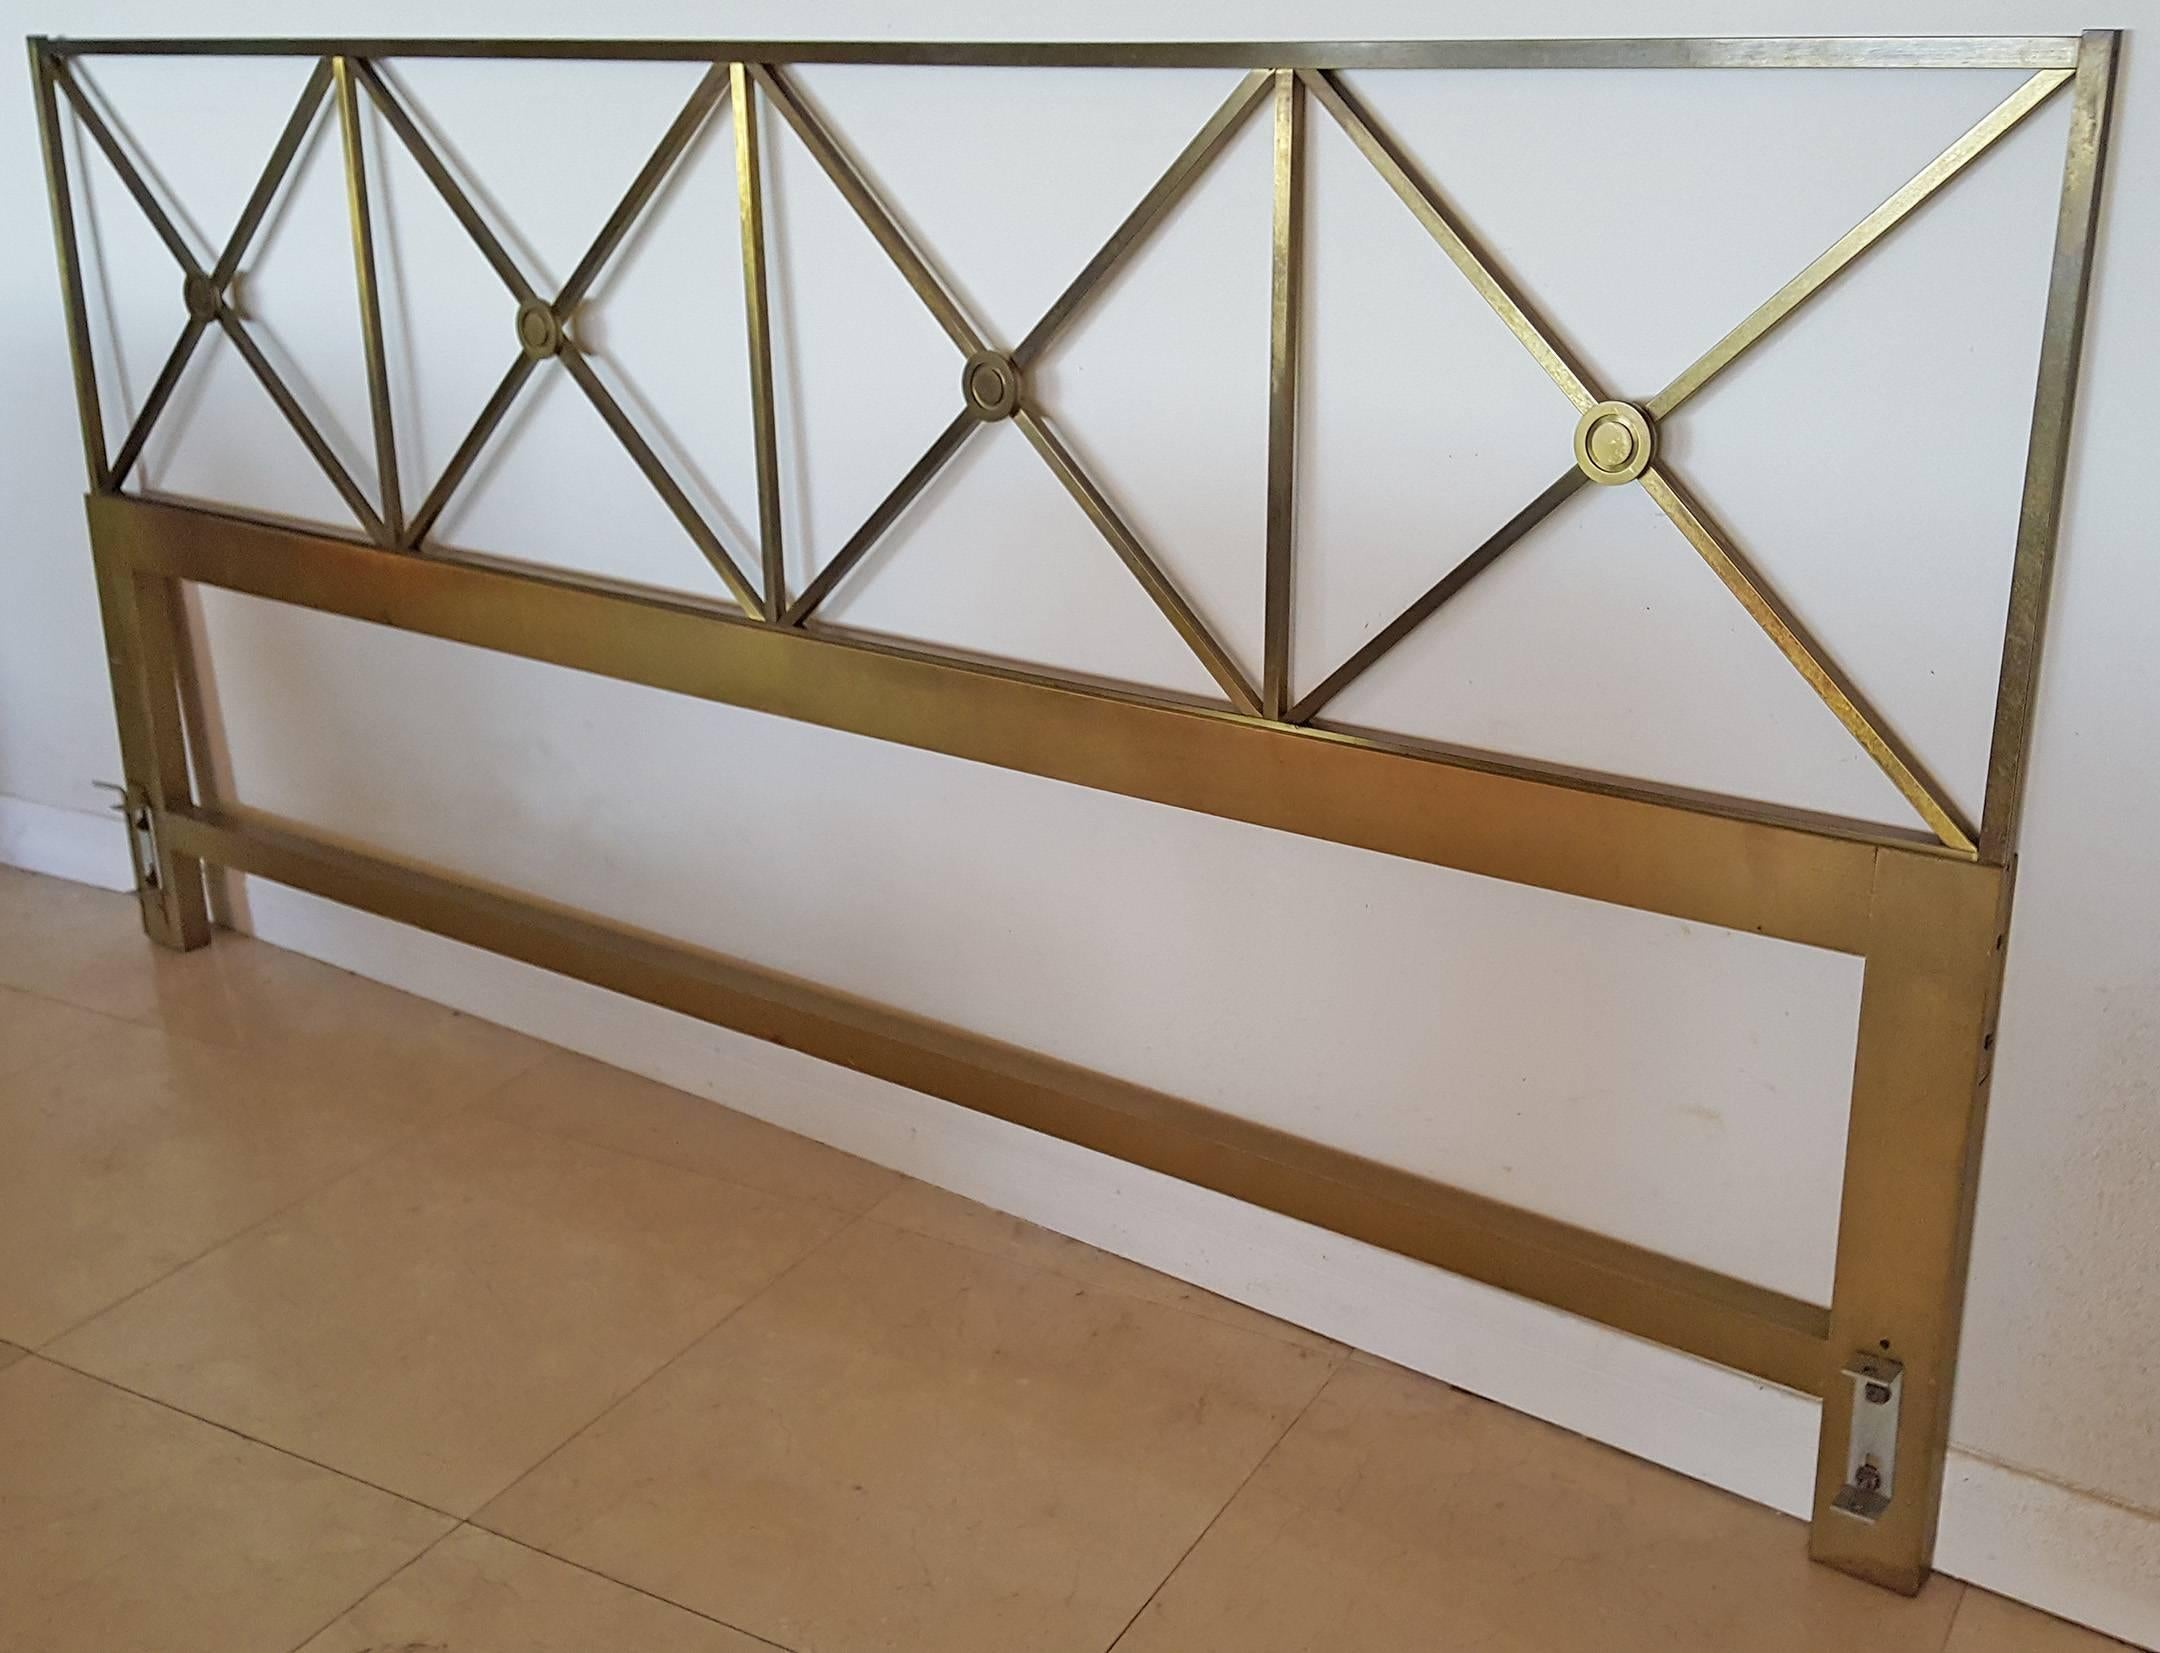 A stunning brass geometric style headboard with a Tommi Parzinger style flair. A timeless piece that has a wonderful patina.